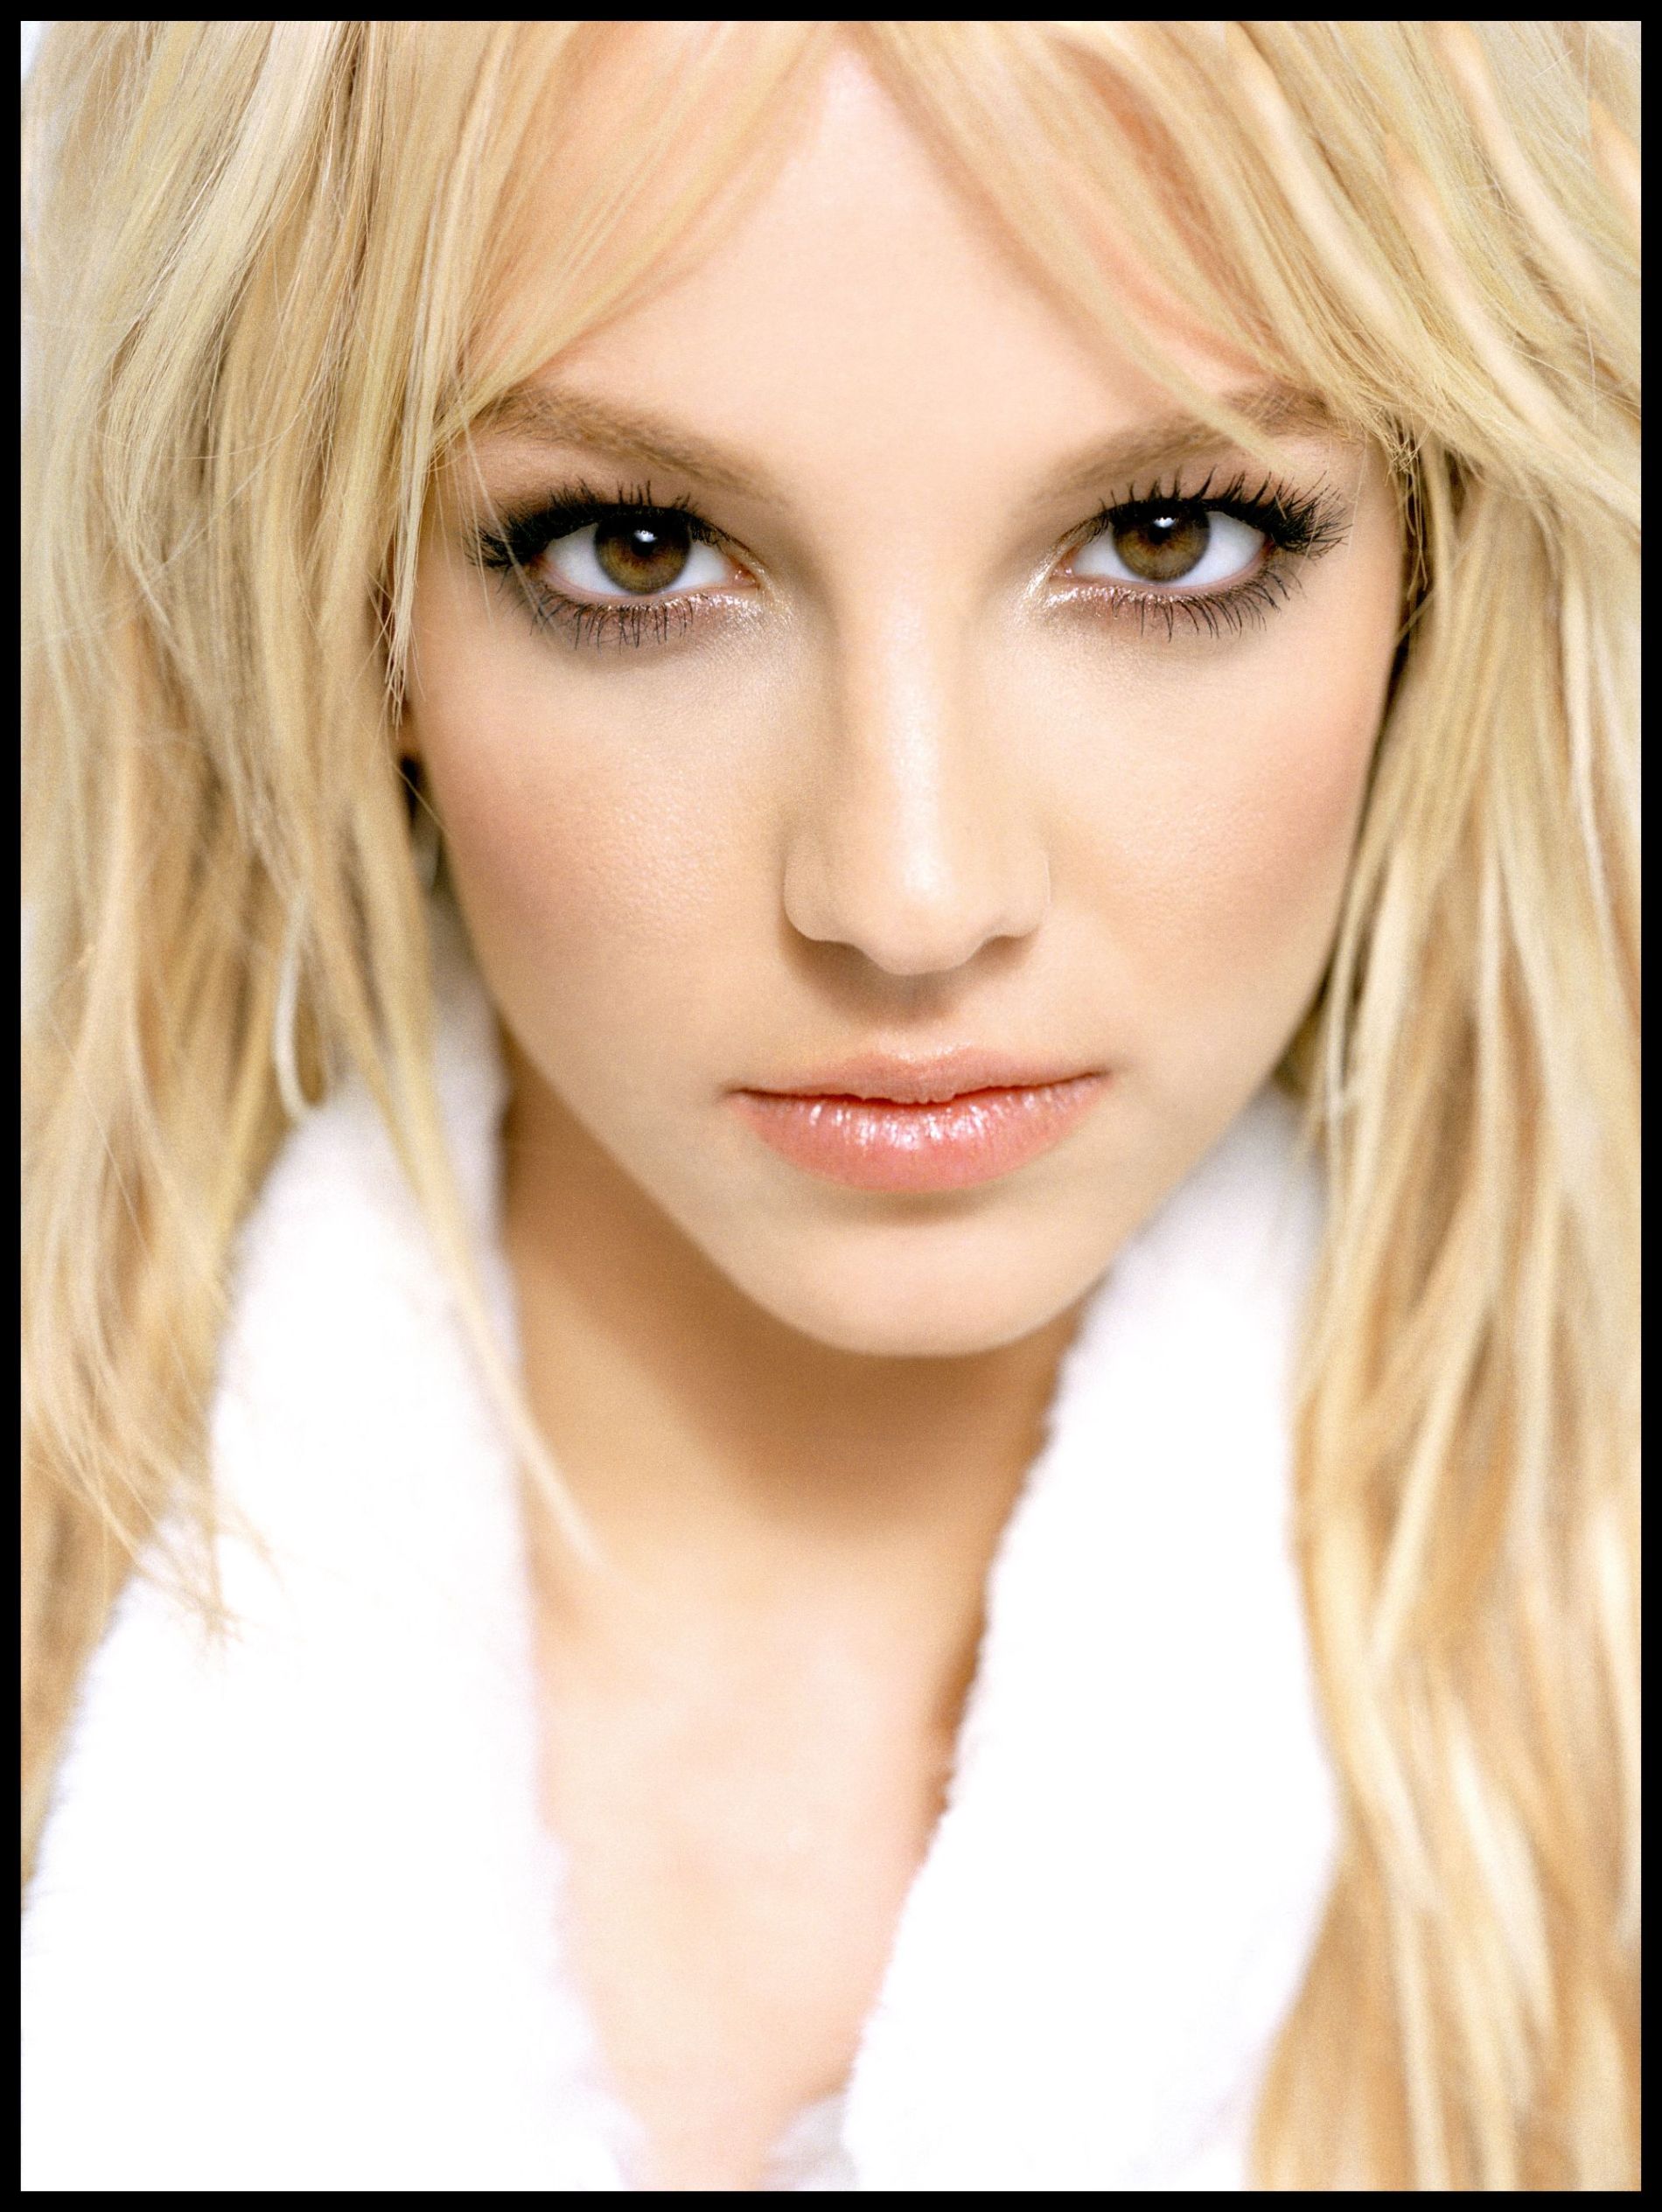 Britney Spears photo gallery - page #386 | Celebs-Place.com